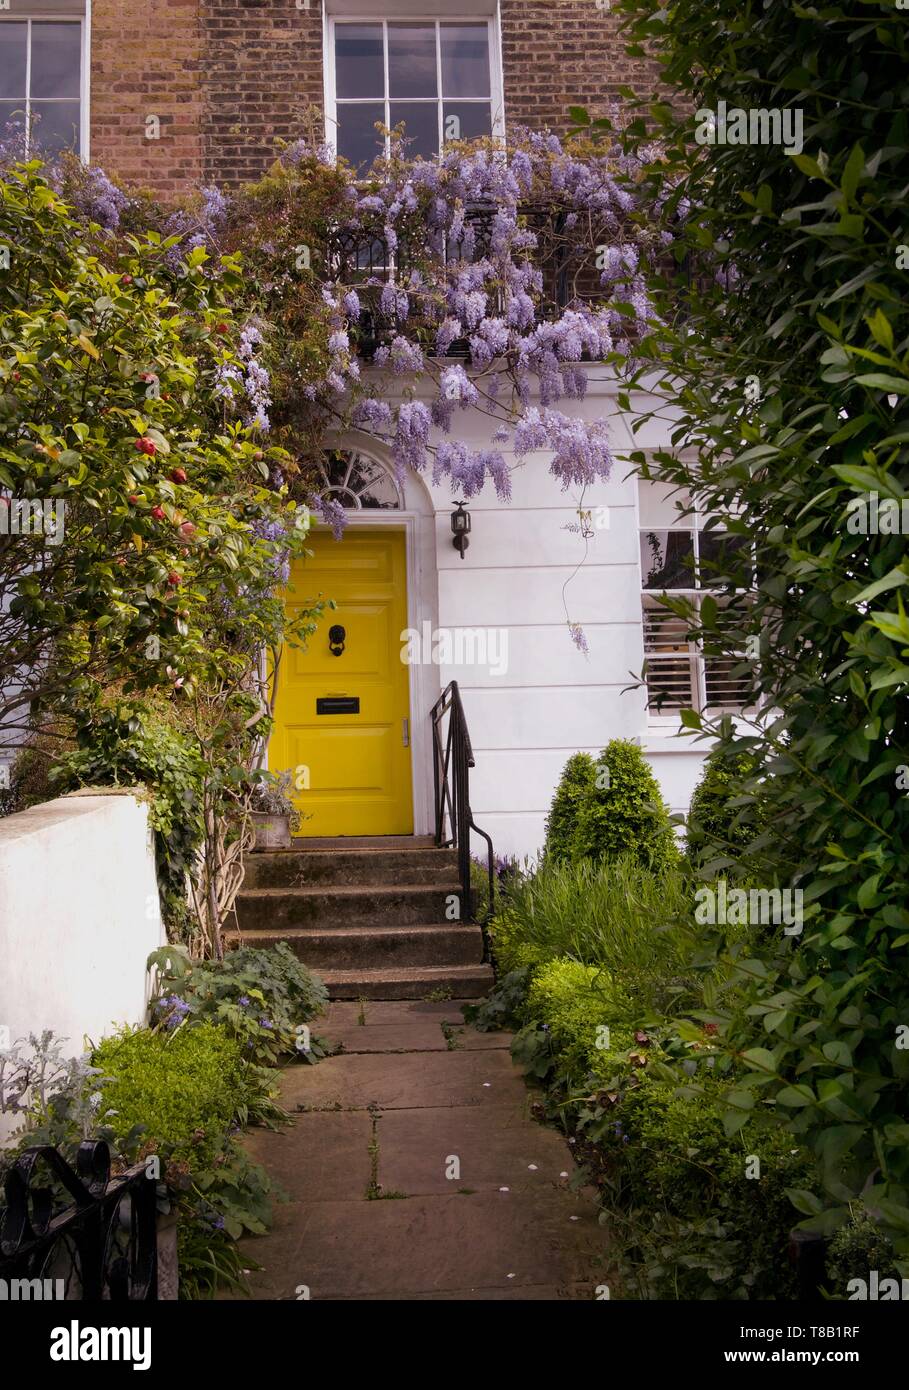 Blossoming wisteria tree climbing on a house with yellow door in Notting Hill, London, UK. Stock Photo